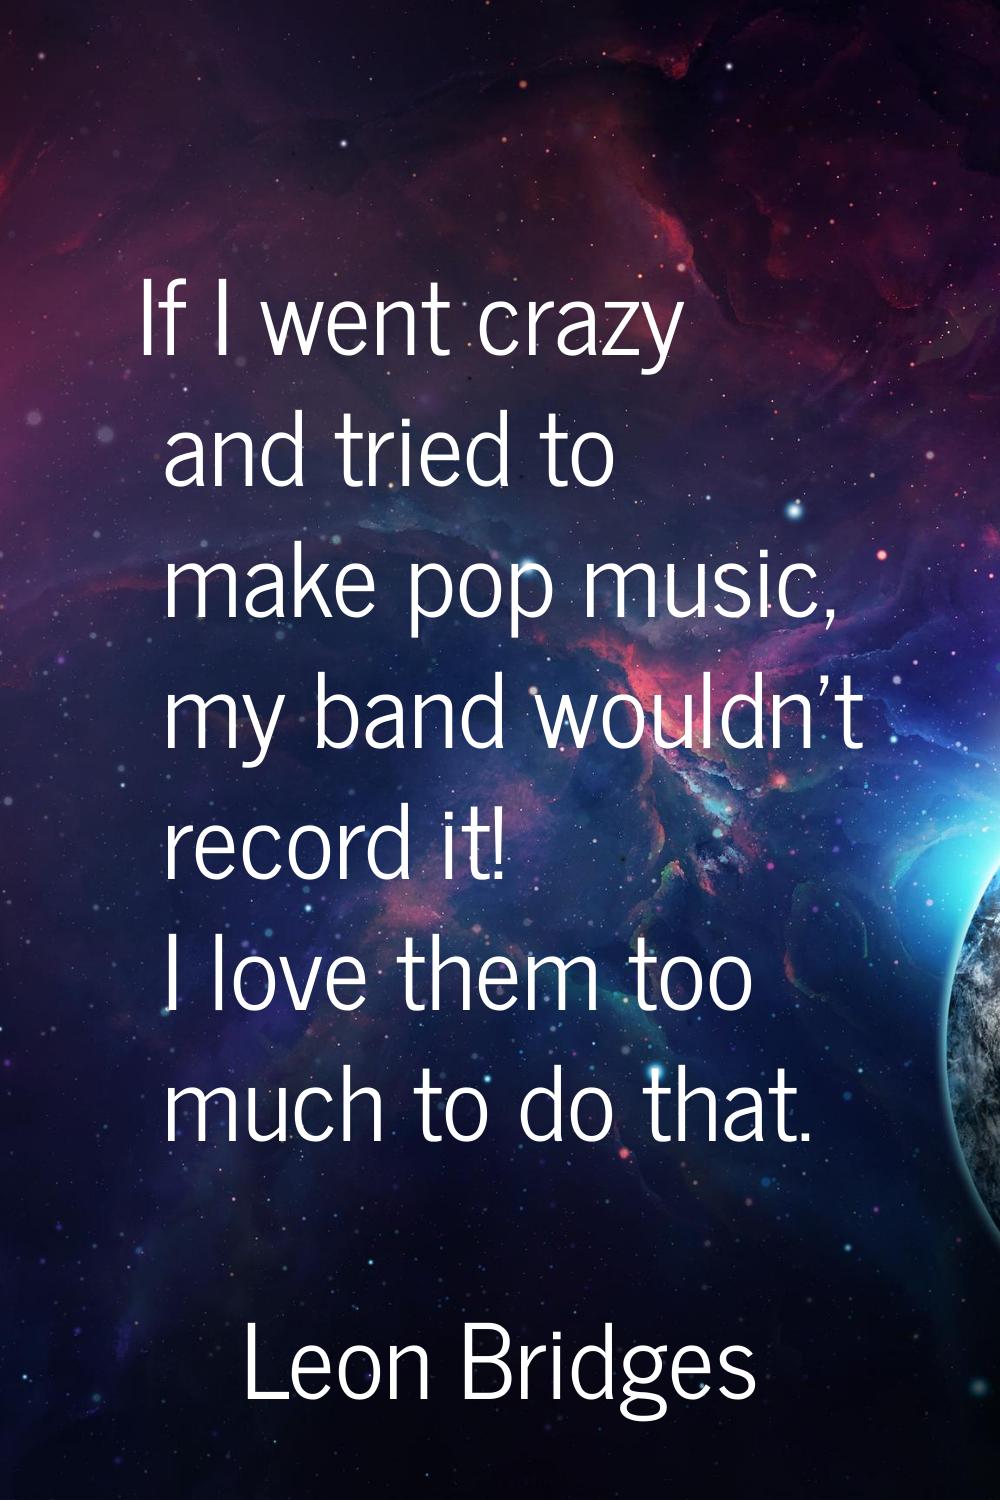 If I went crazy and tried to make pop music, my band wouldn't record it! I love them too much to do